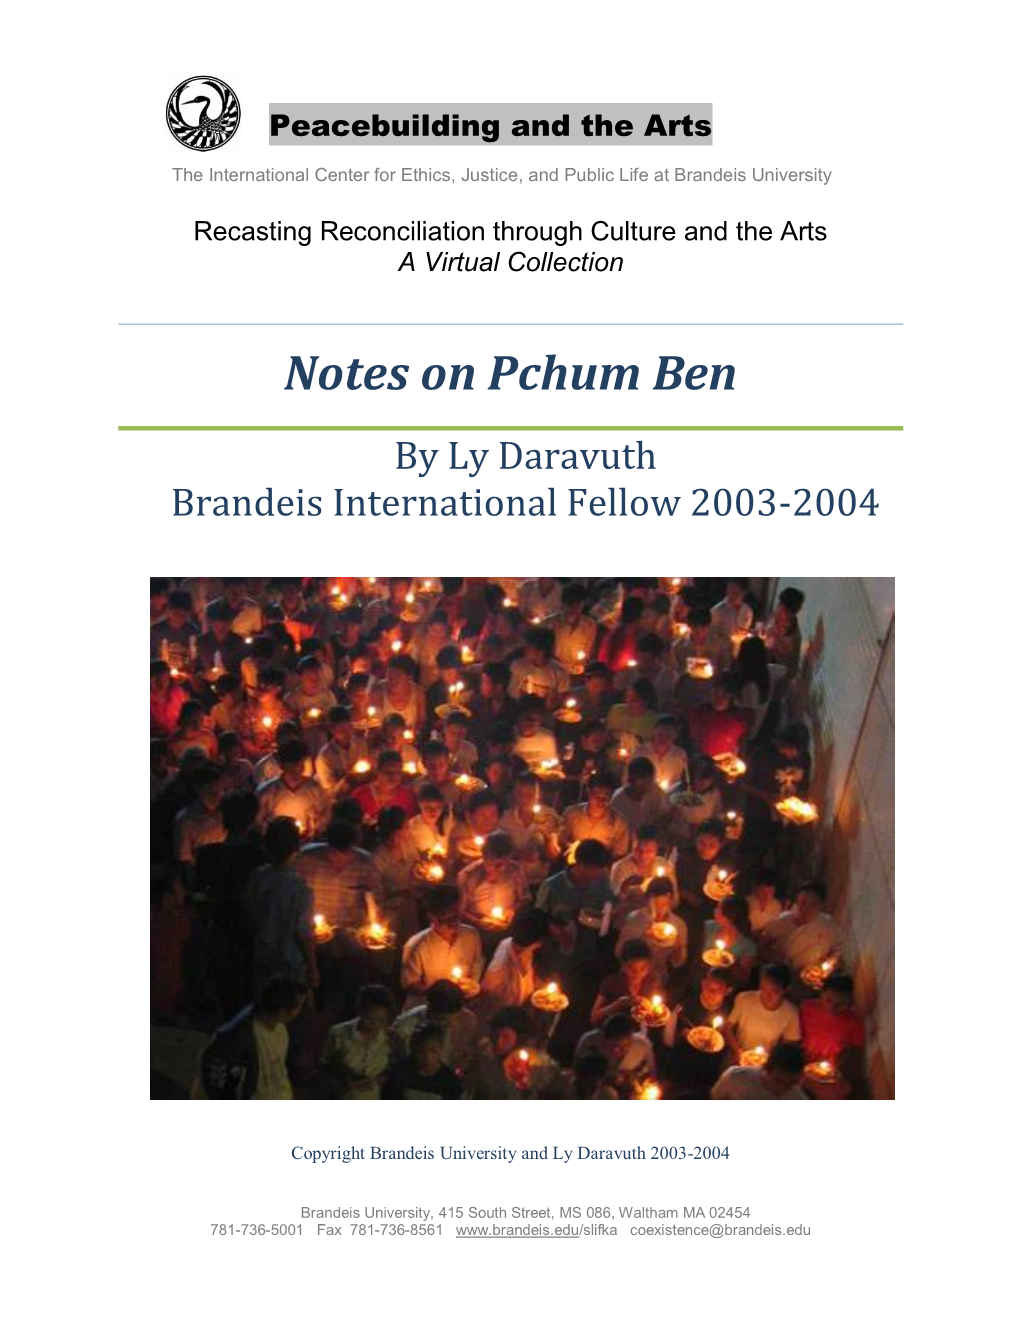 Notes on Pchum Ben by Ly Daravuth Brandeis International Fellow 2003-2004